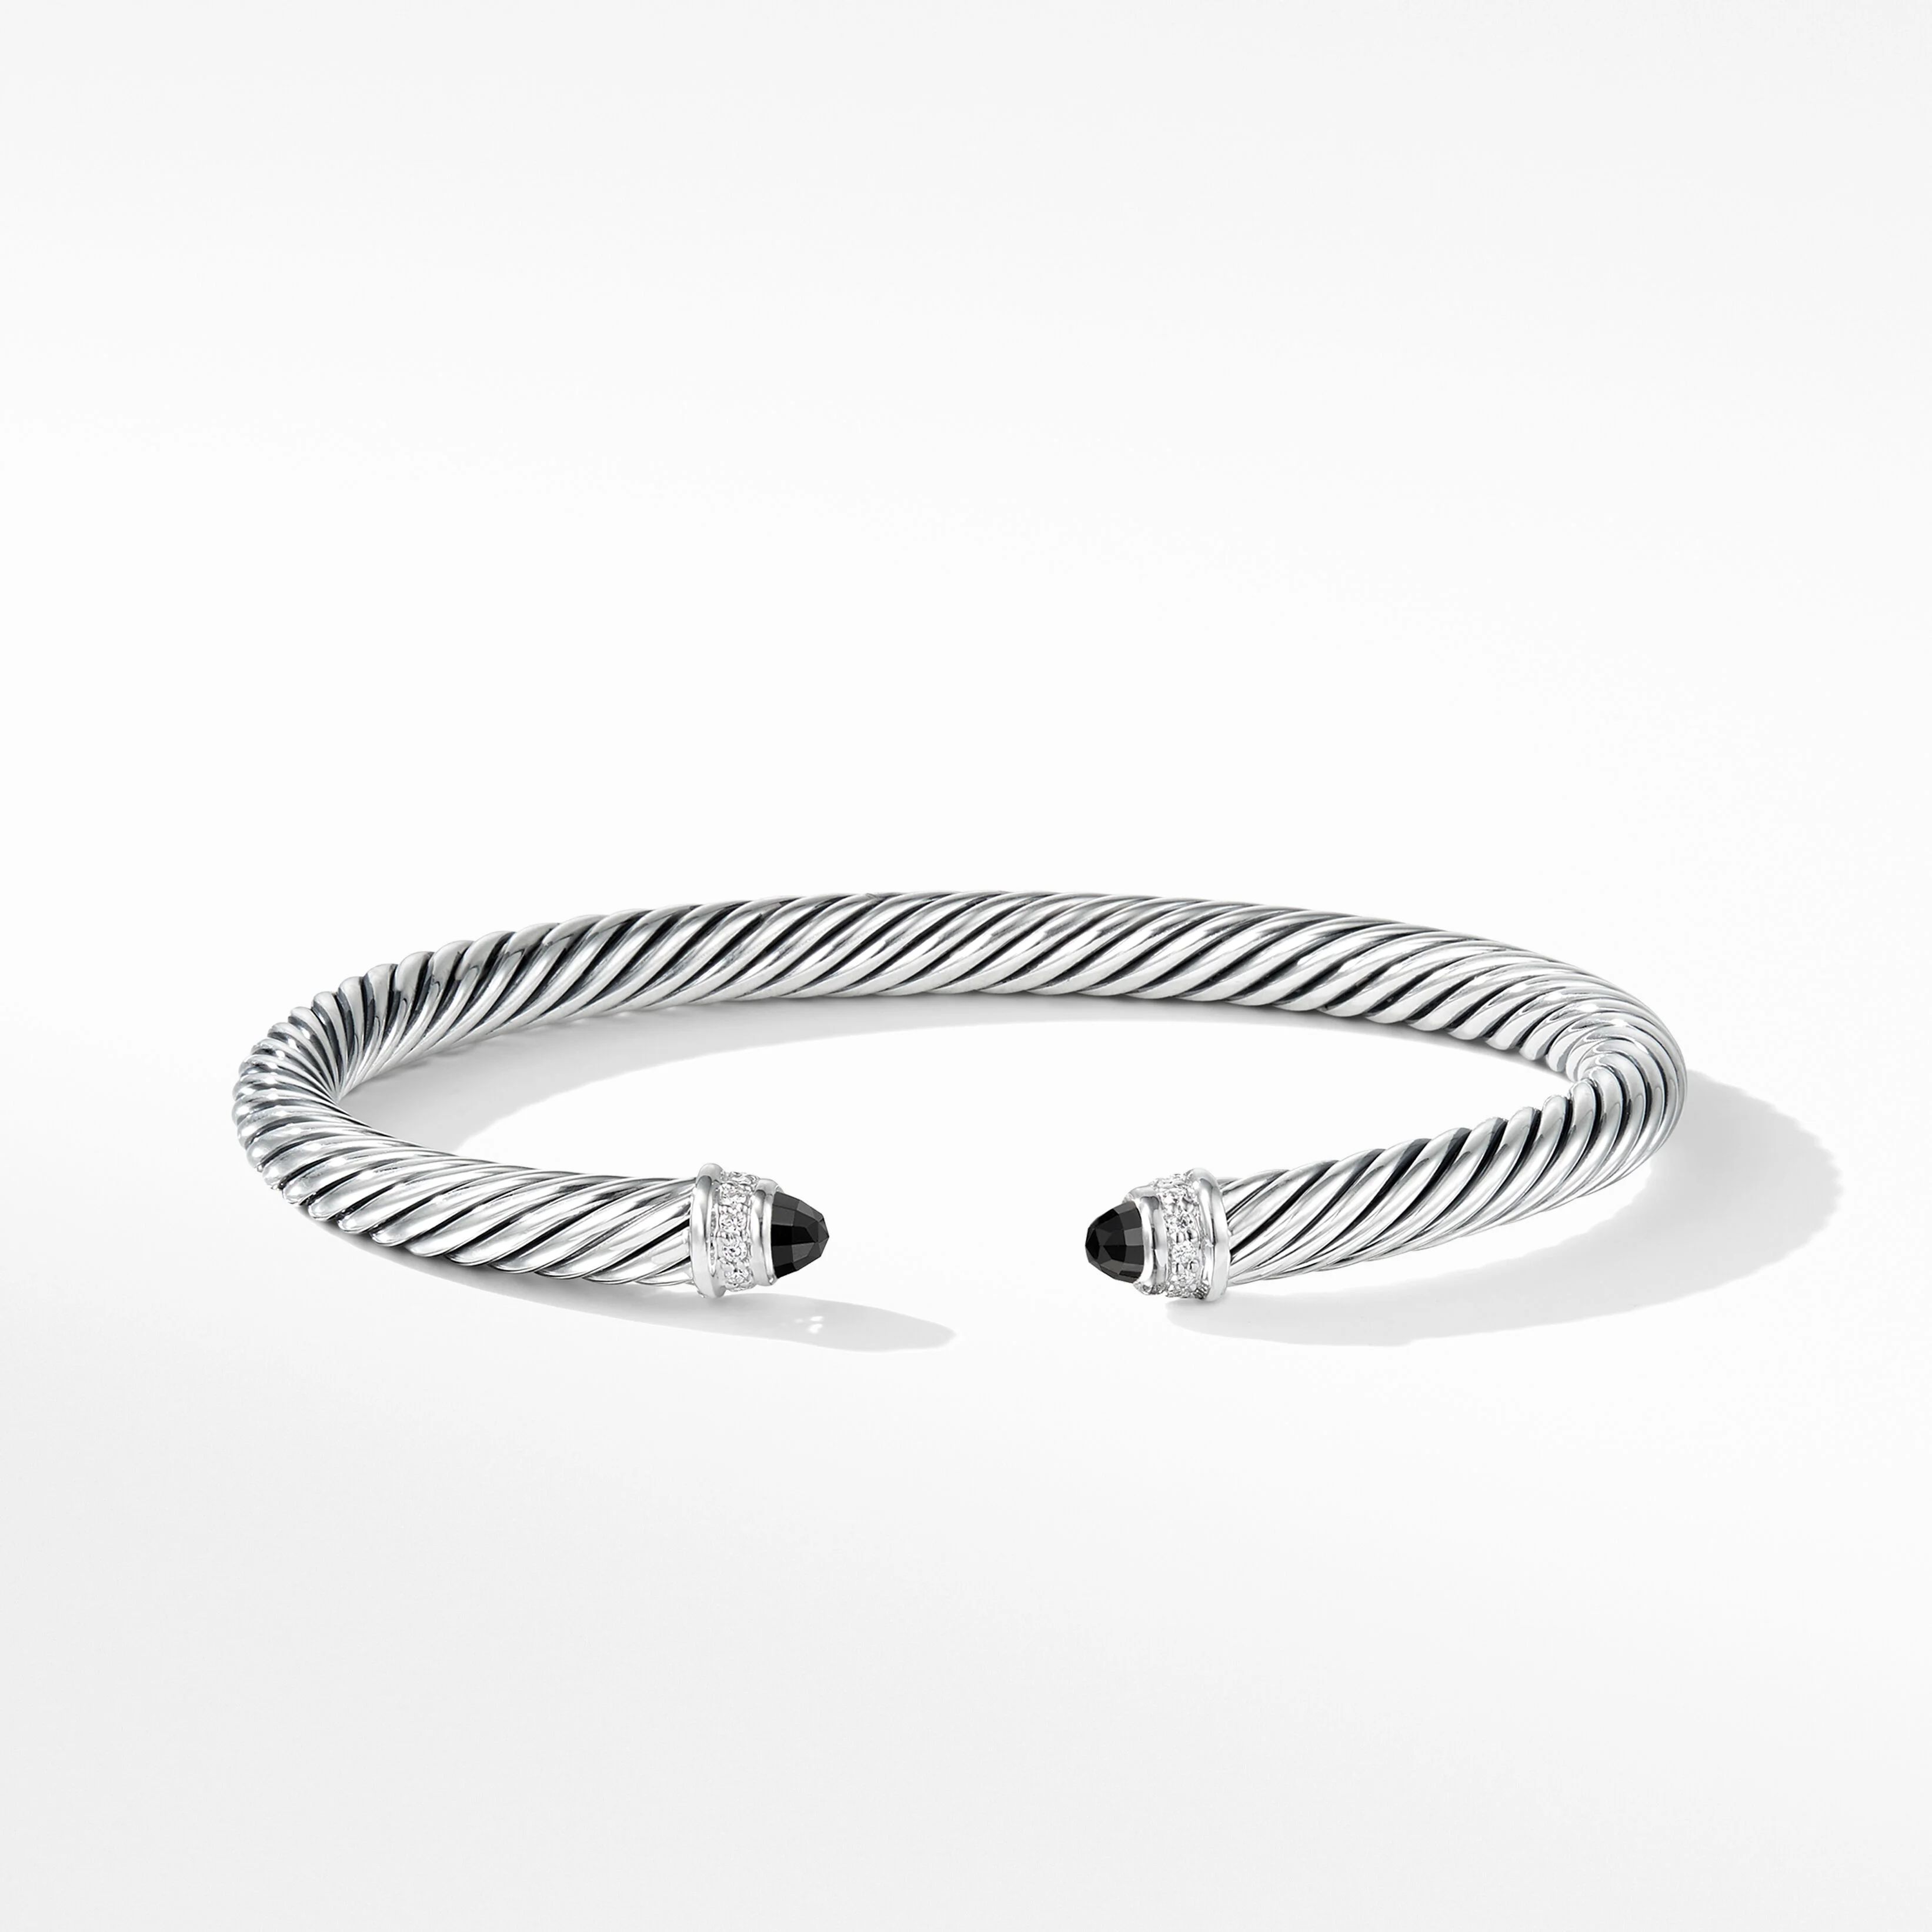 Cable Classics Bracelet in Sterling Silver with Black Onyx and Pavé Diamonds | David Yurman